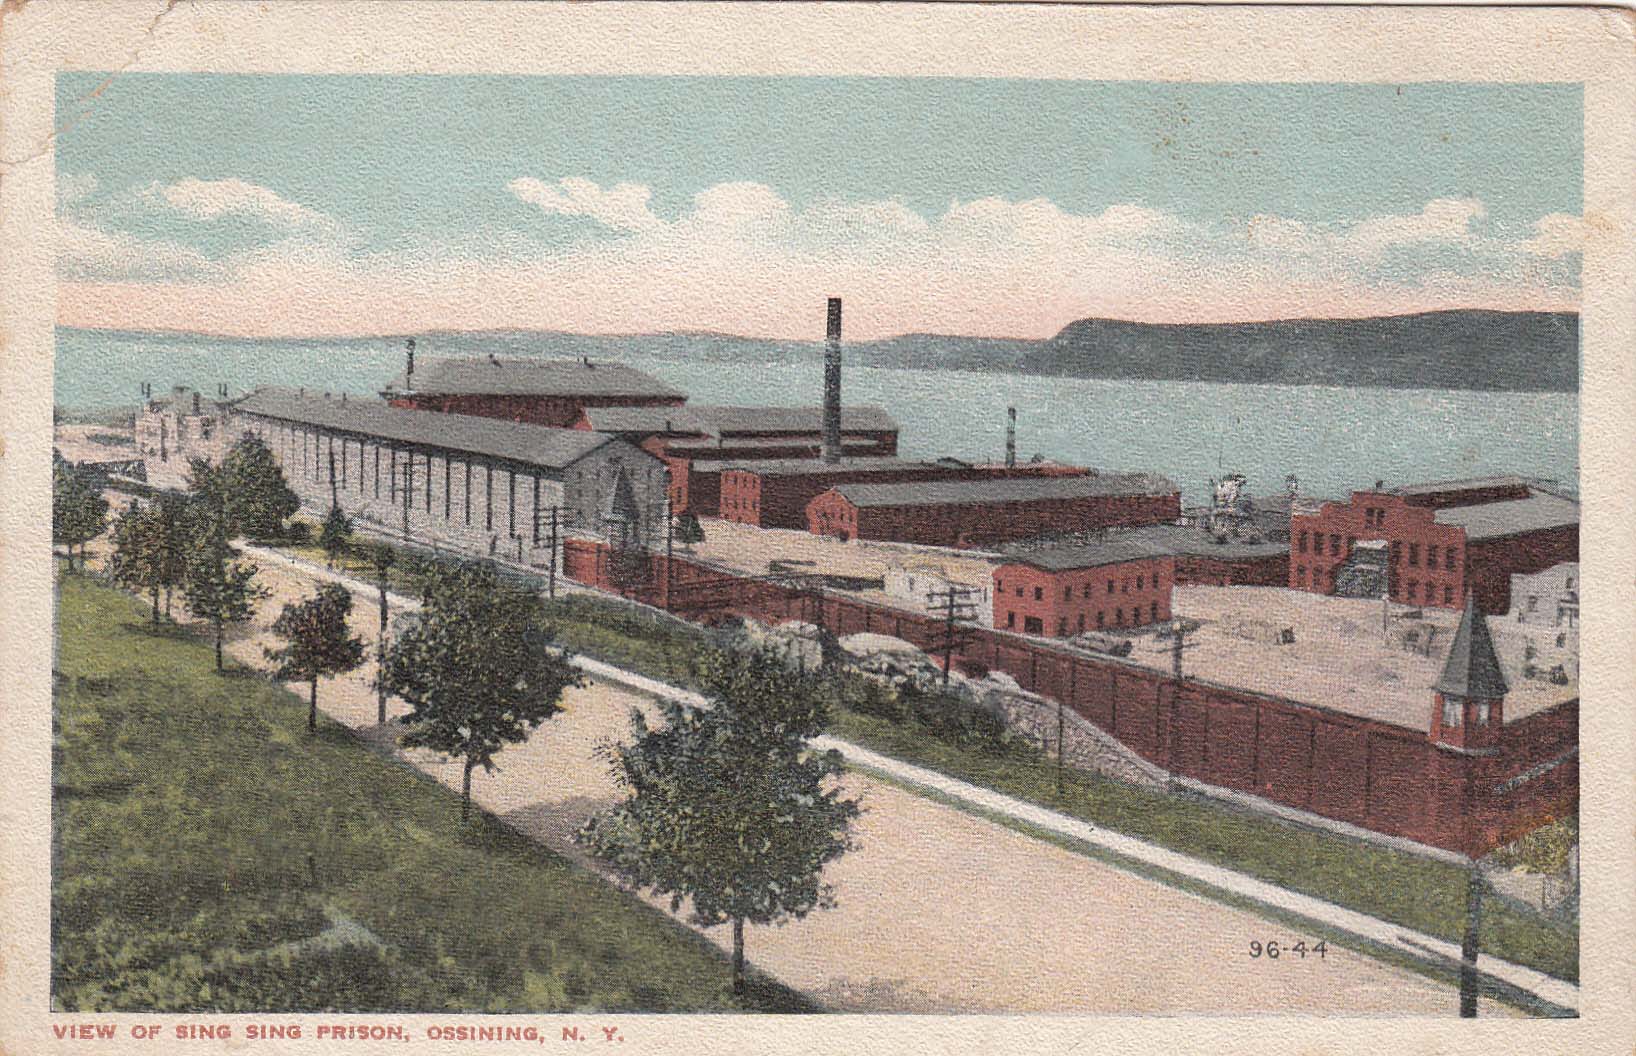 Inside Sing Sing Prison And The Mutual Welfare League Postcard History